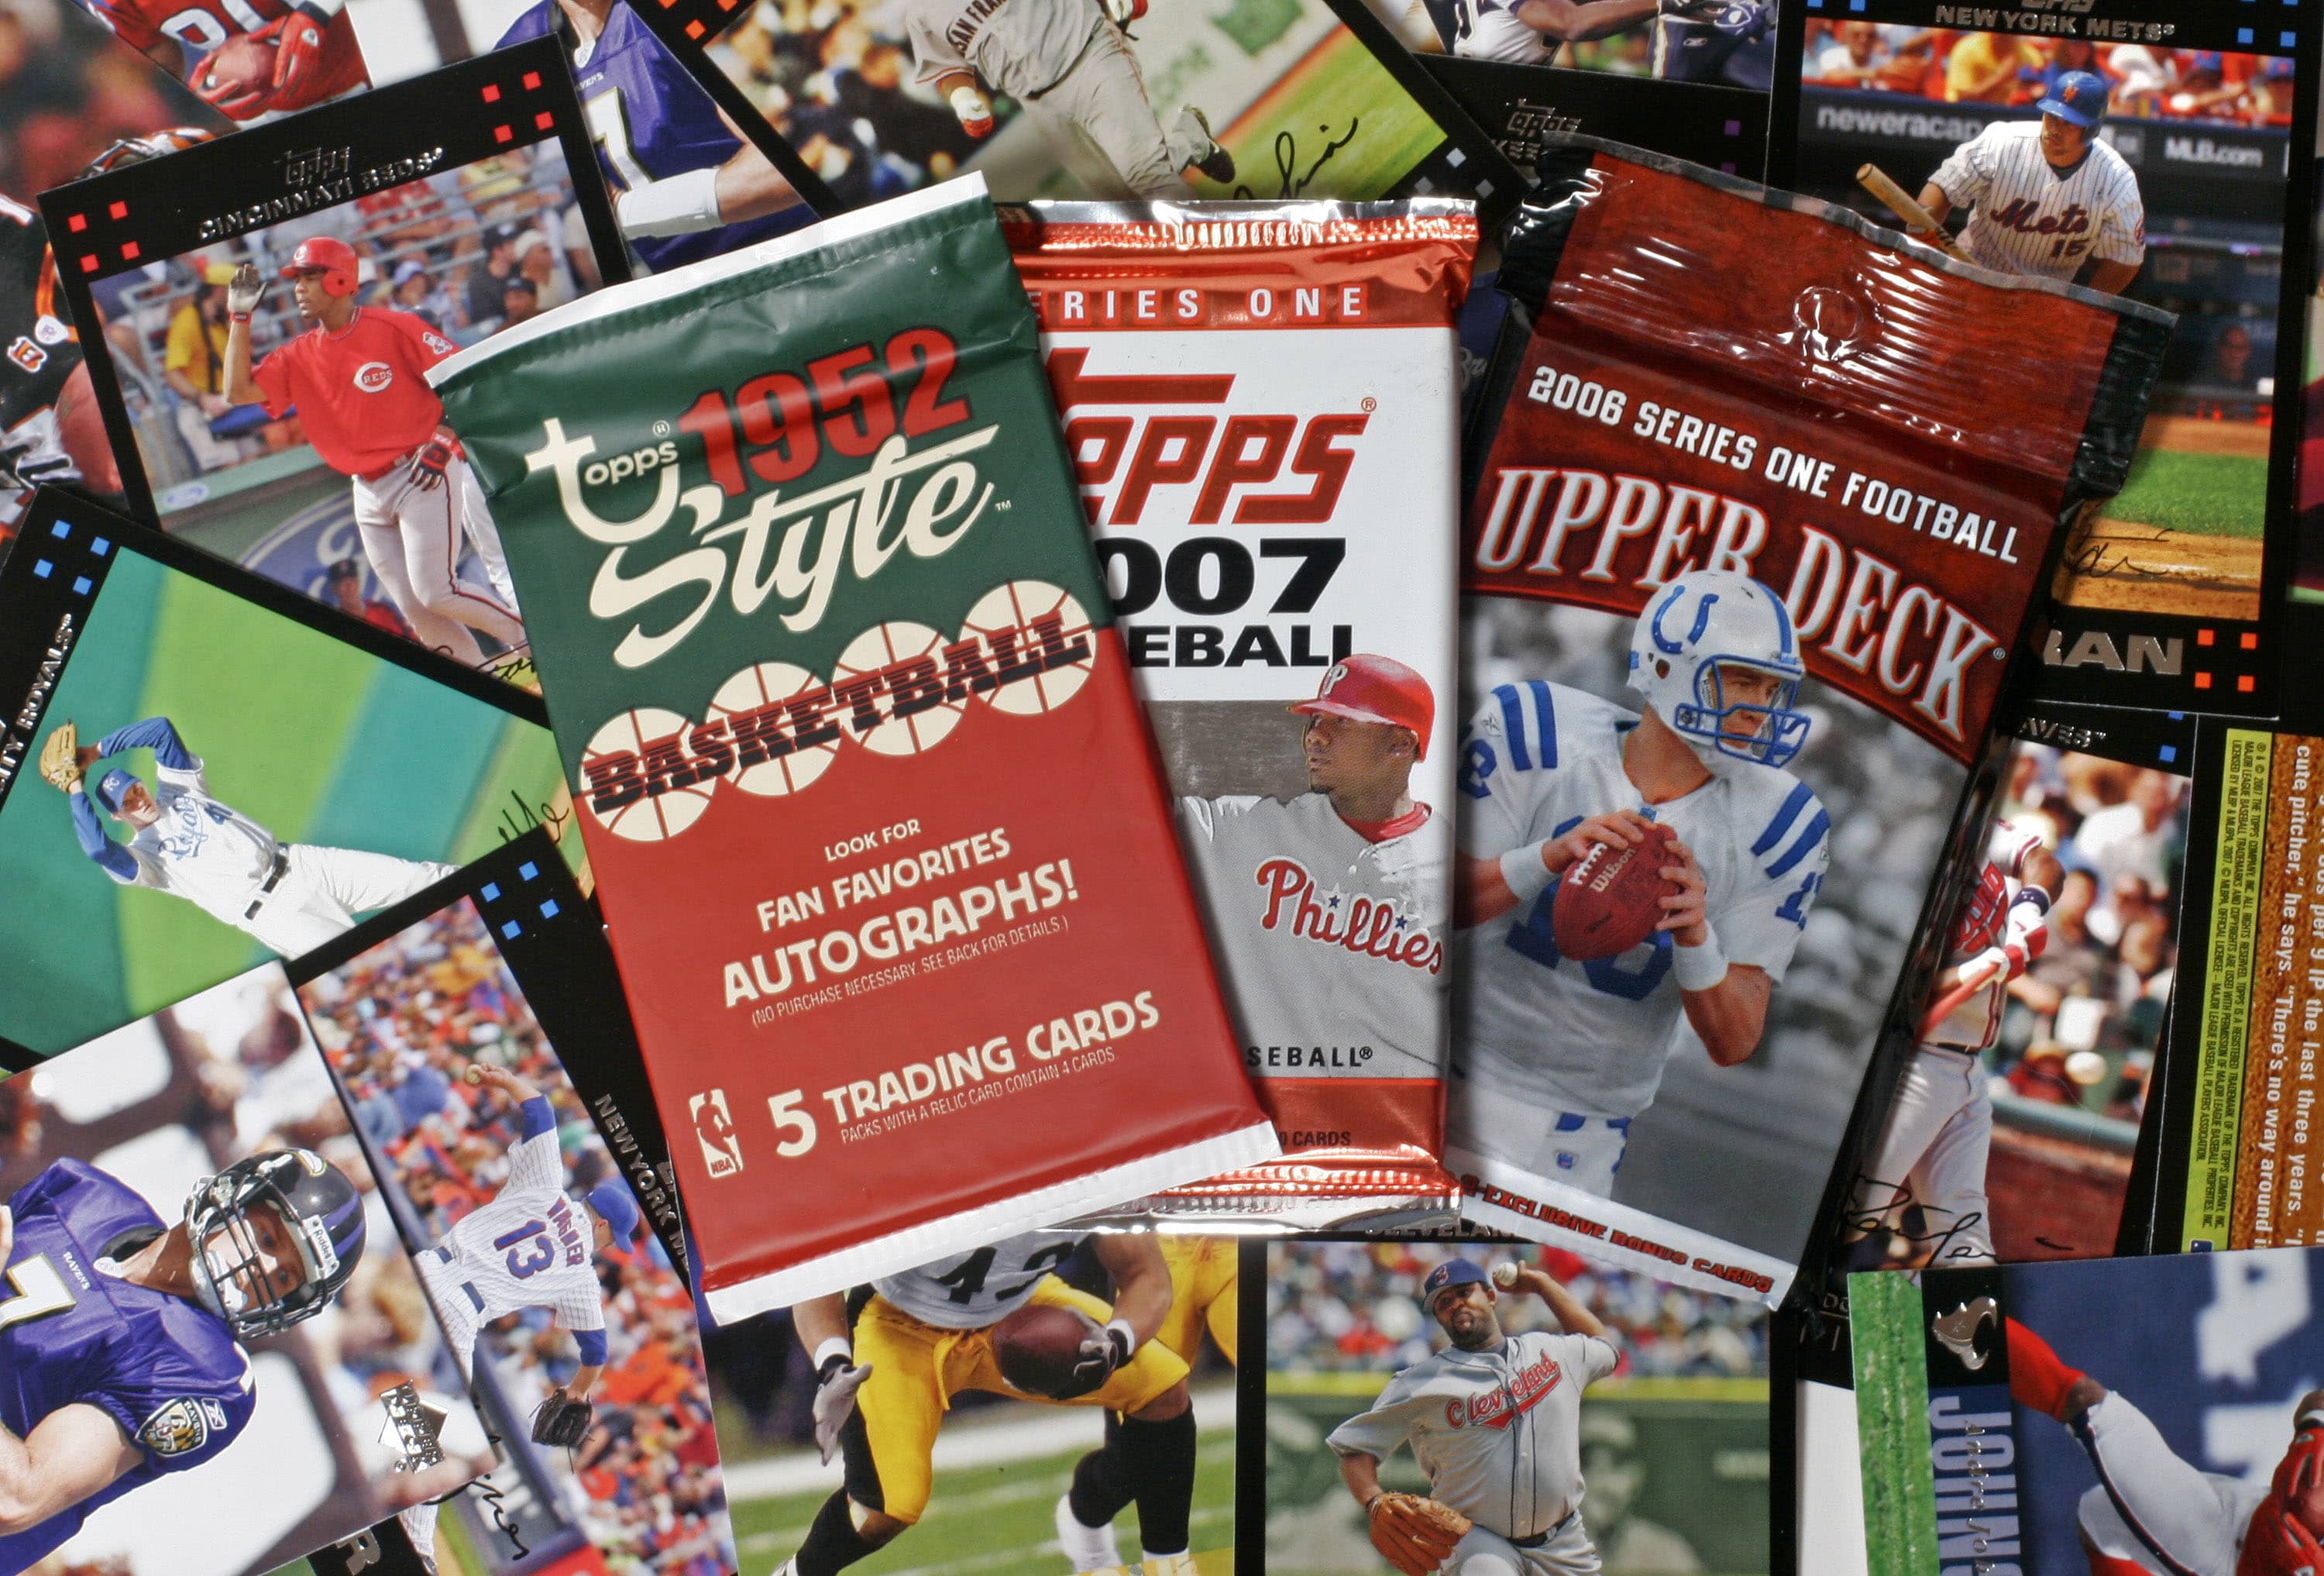 Baseball card company Topps to go public through the SPAC agreement